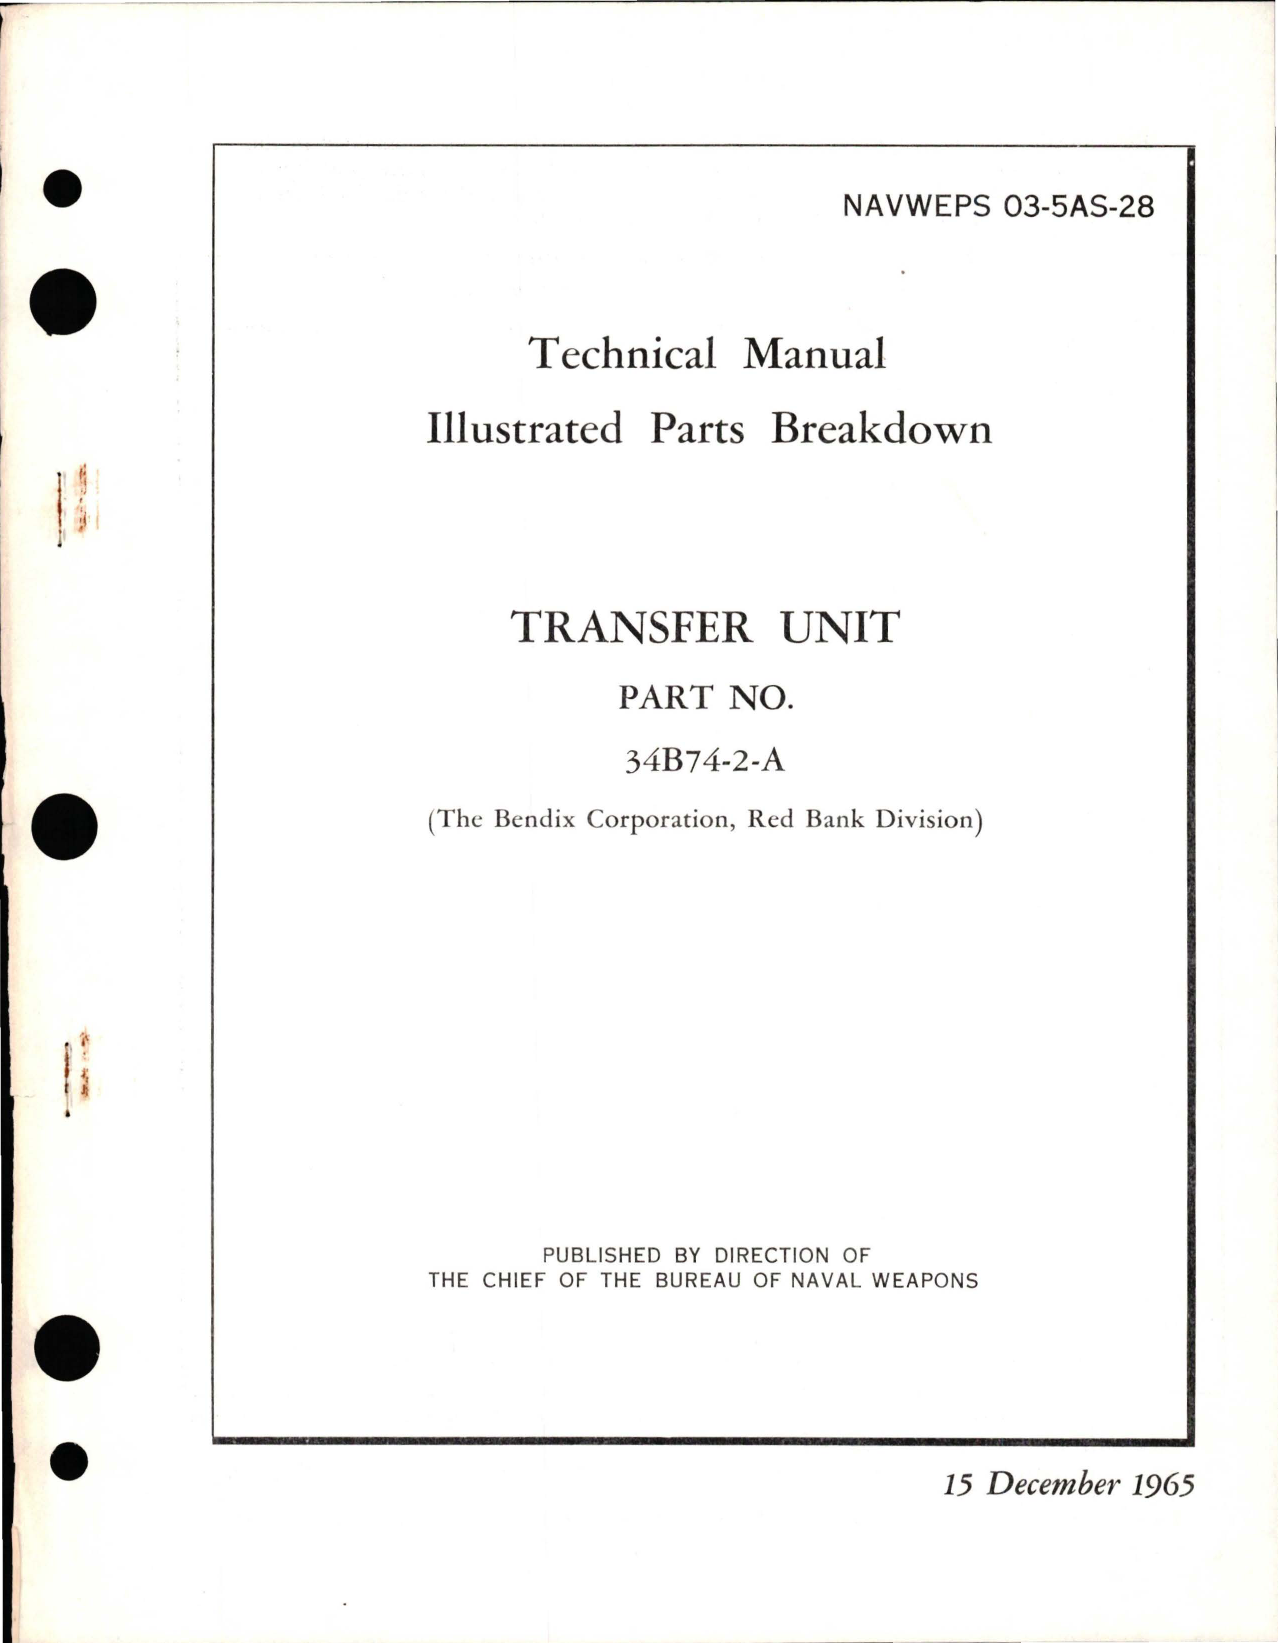 Sample page 1 from AirCorps Library document: Illustrated Parts Breakdown for Transfer Unit - Part 34B74-2-A